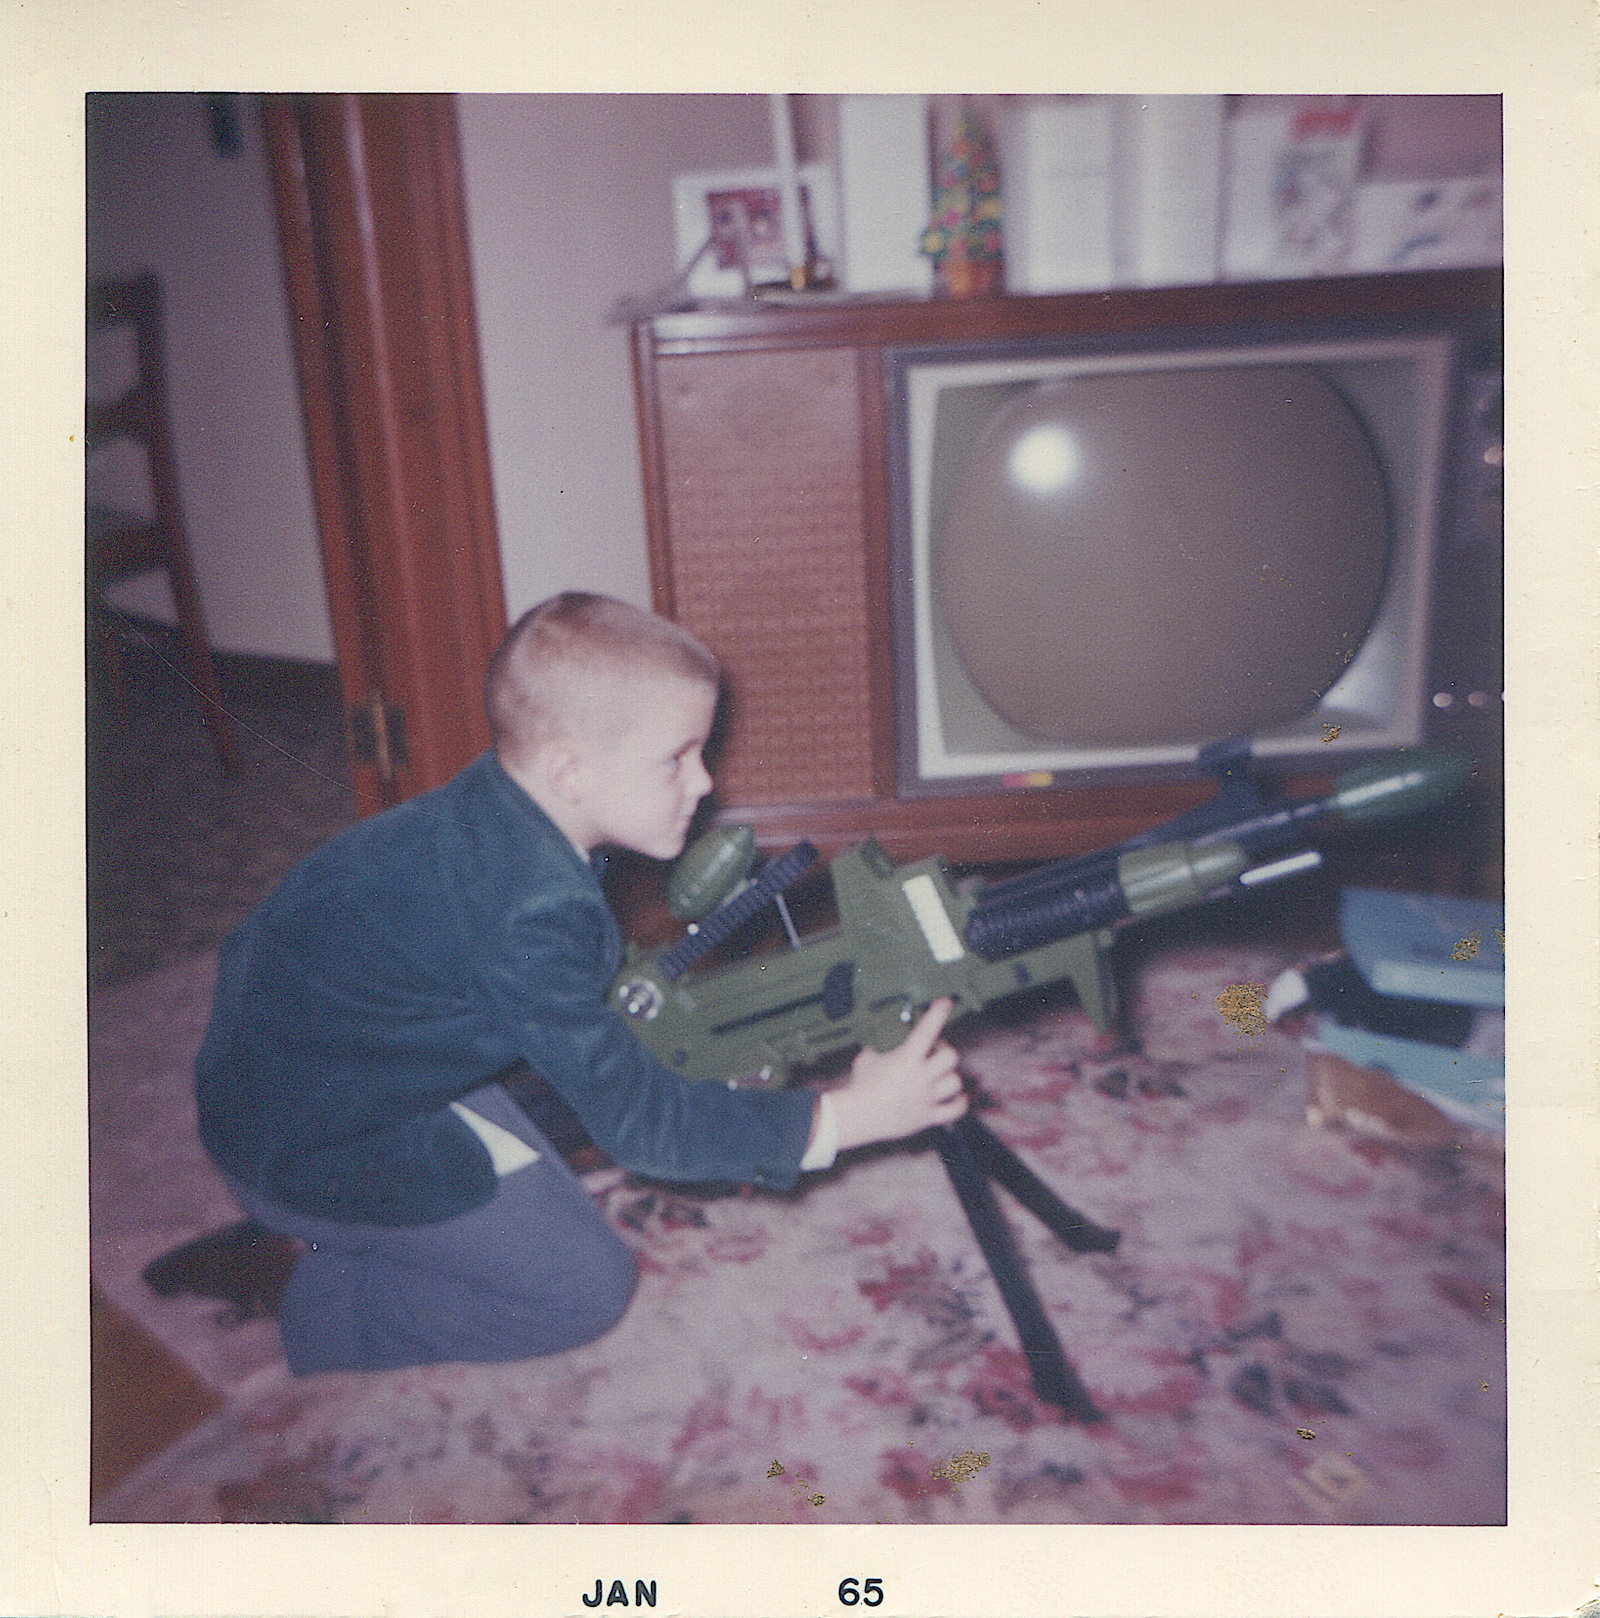 A young boy with a submachine gun in front of a TV set